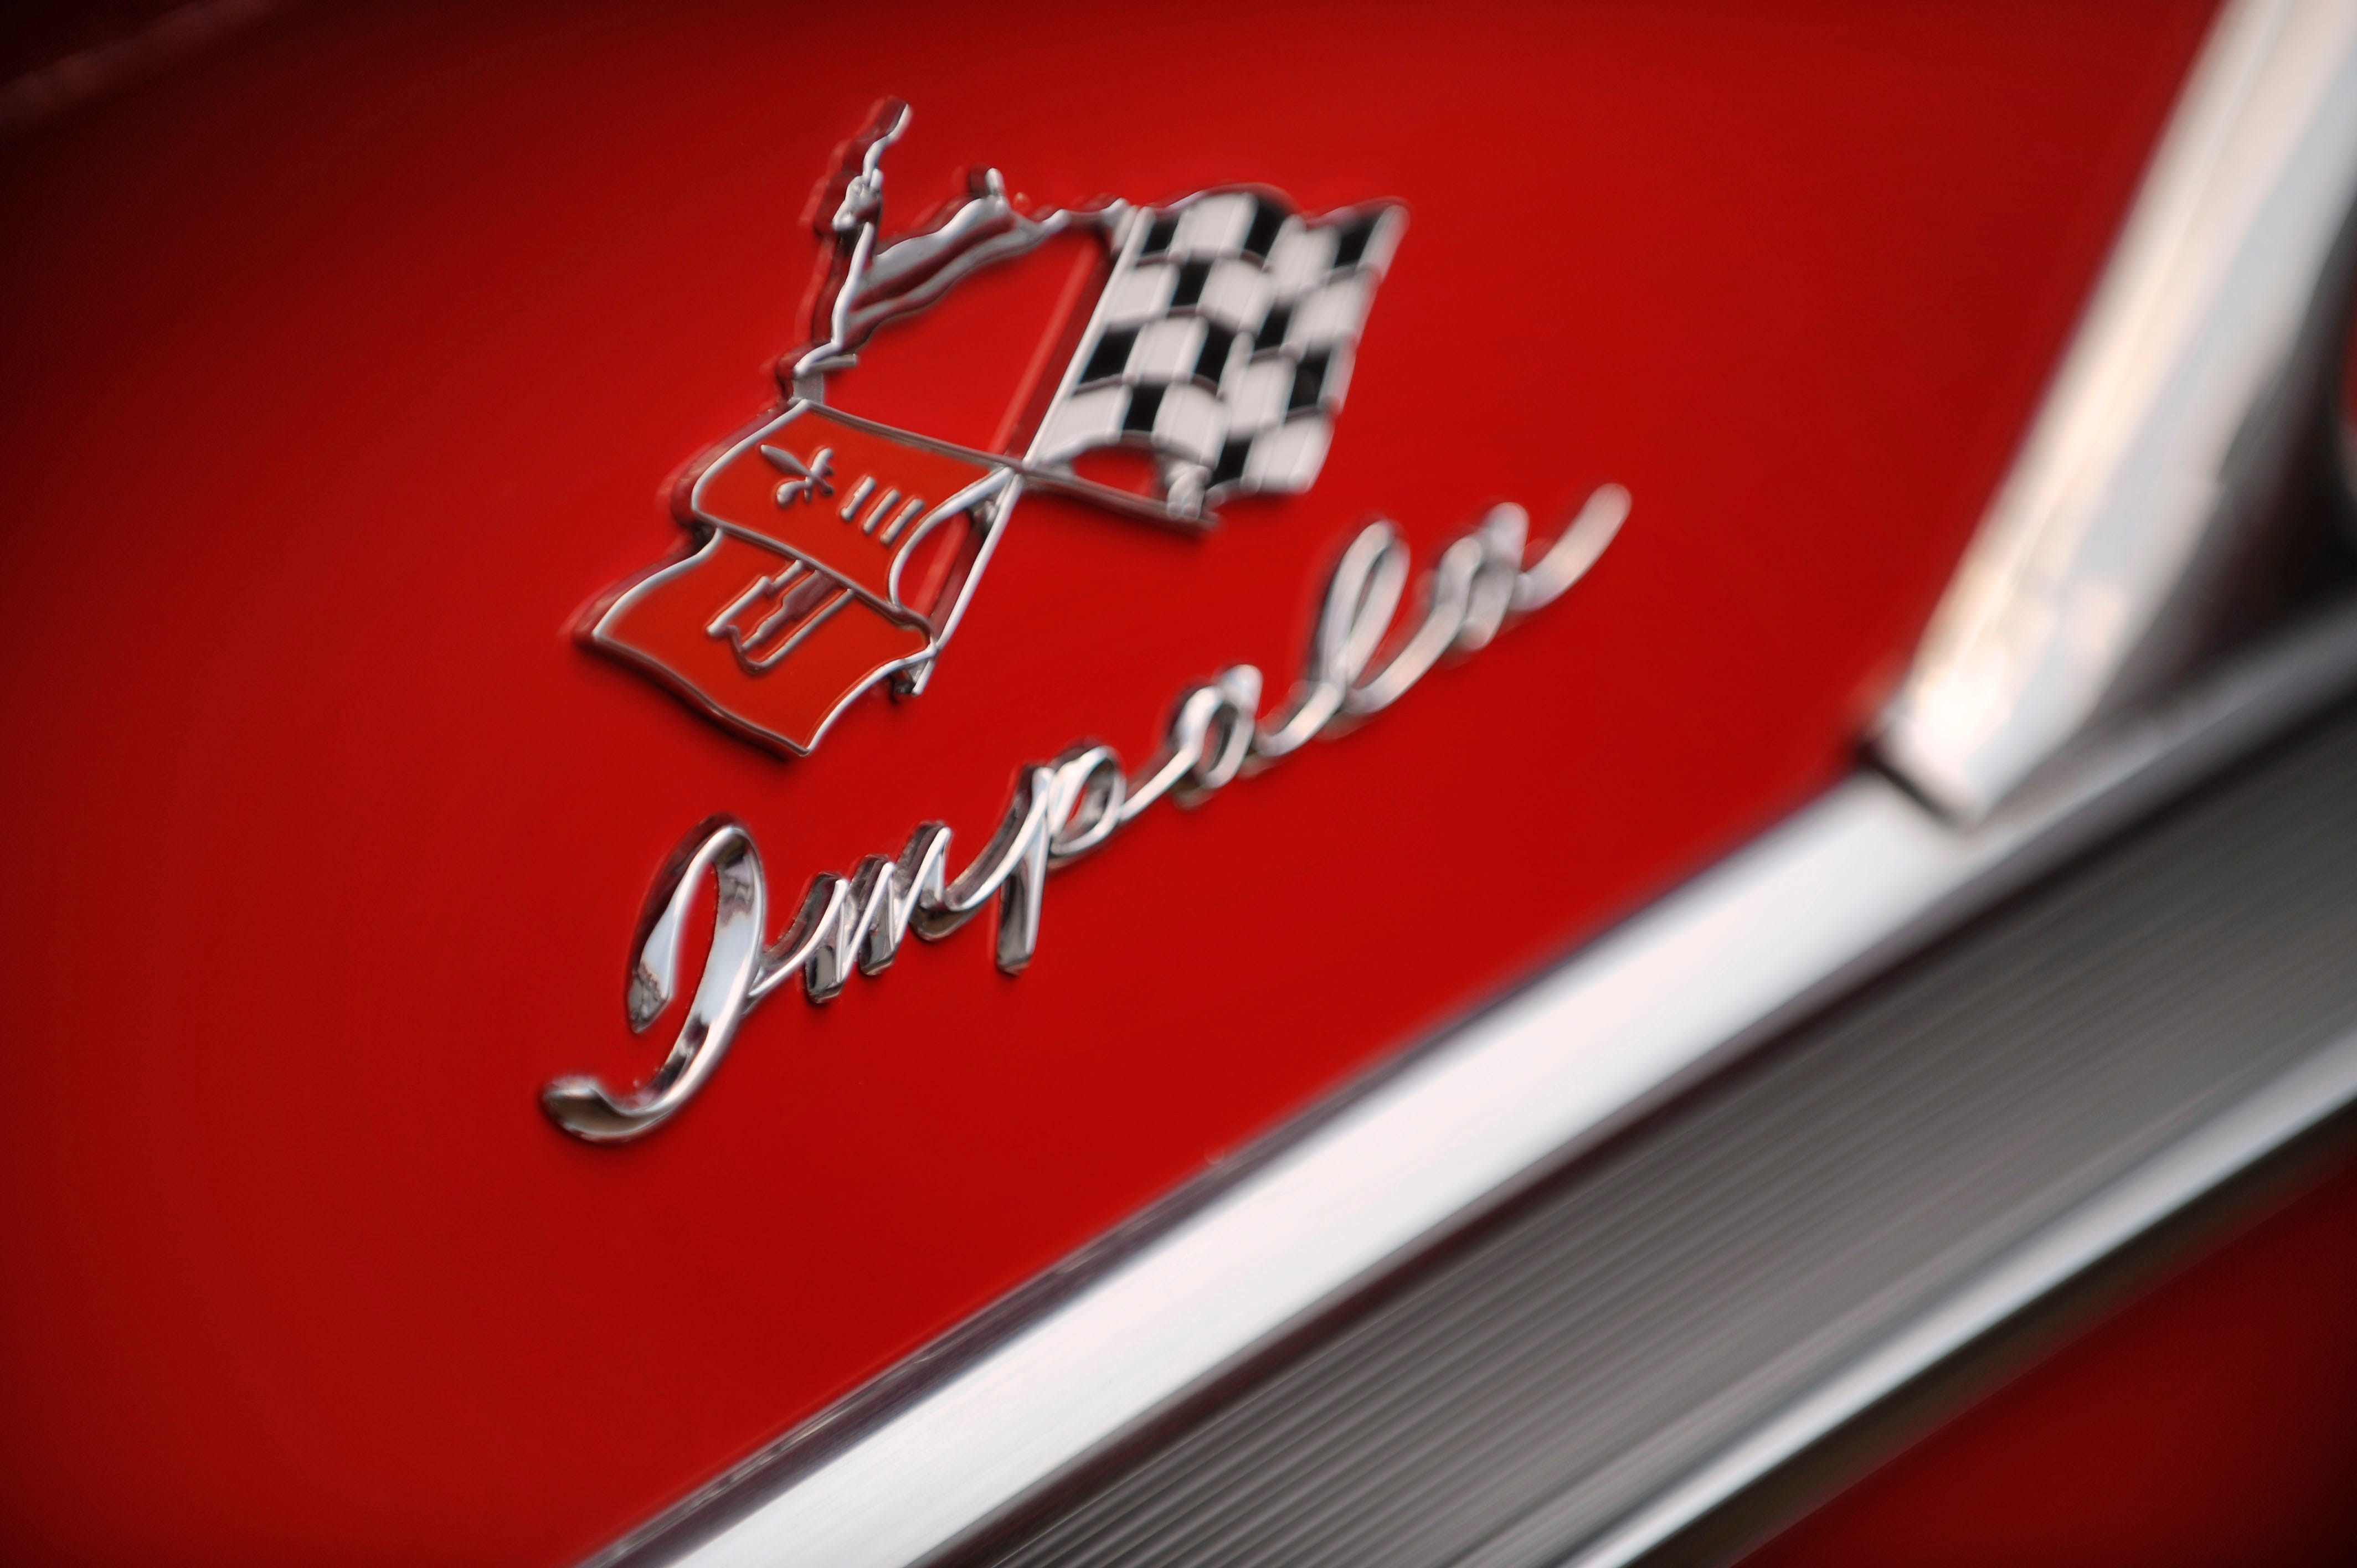 The logo from a "Viper Red" 1958 Chevy Impala at the annual Woodward Dream Cruise in Royal Oak, Michigan on Aug. 15, 2009.